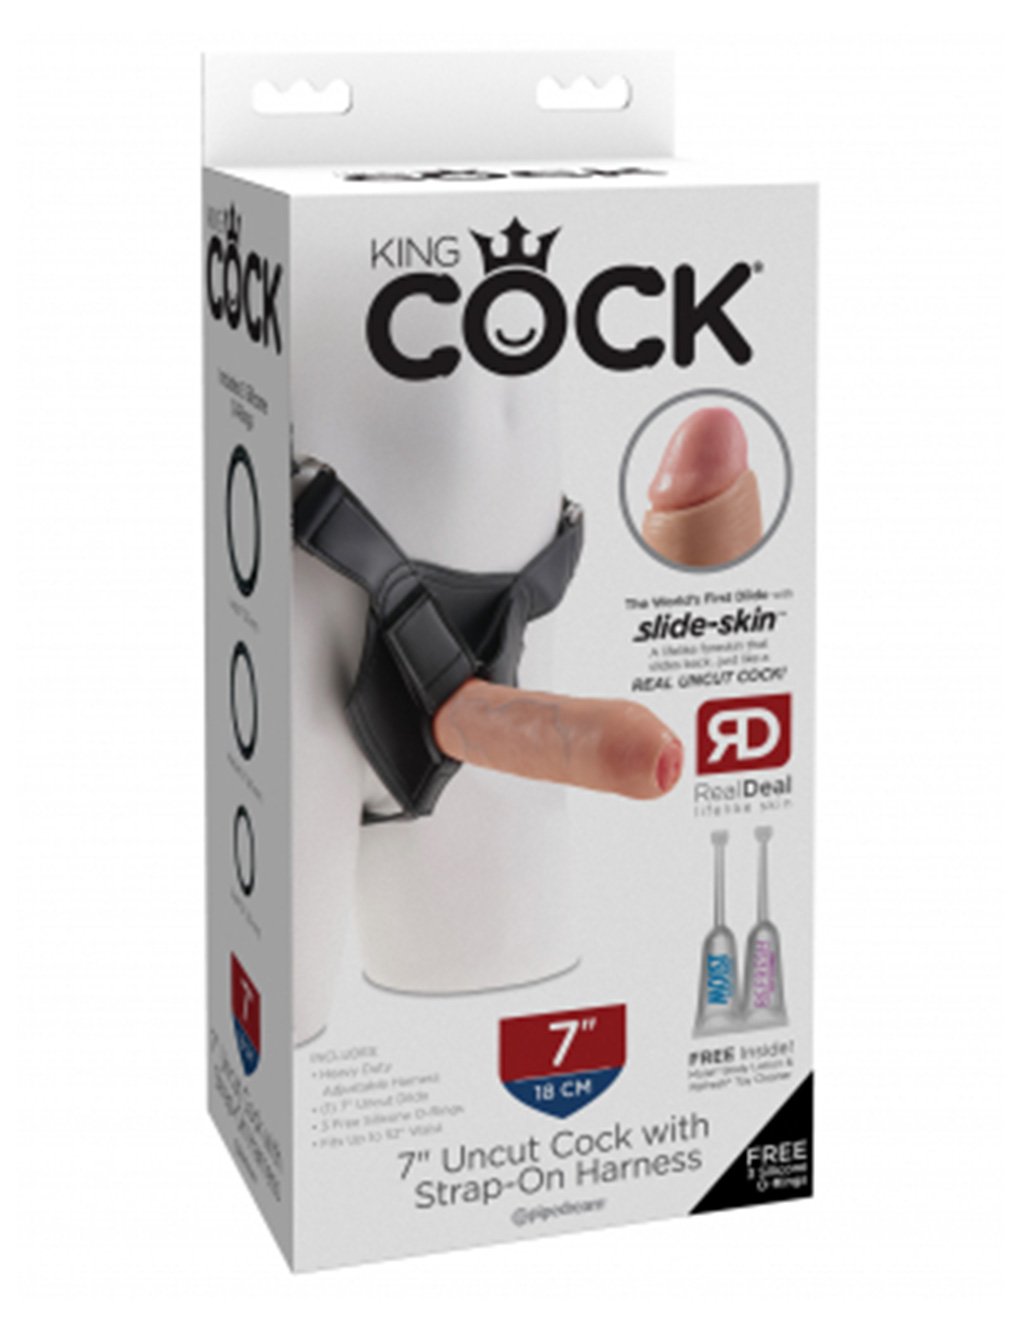 King Cock Strap-On Harness with 7 Inch Uncut Dildo- Box